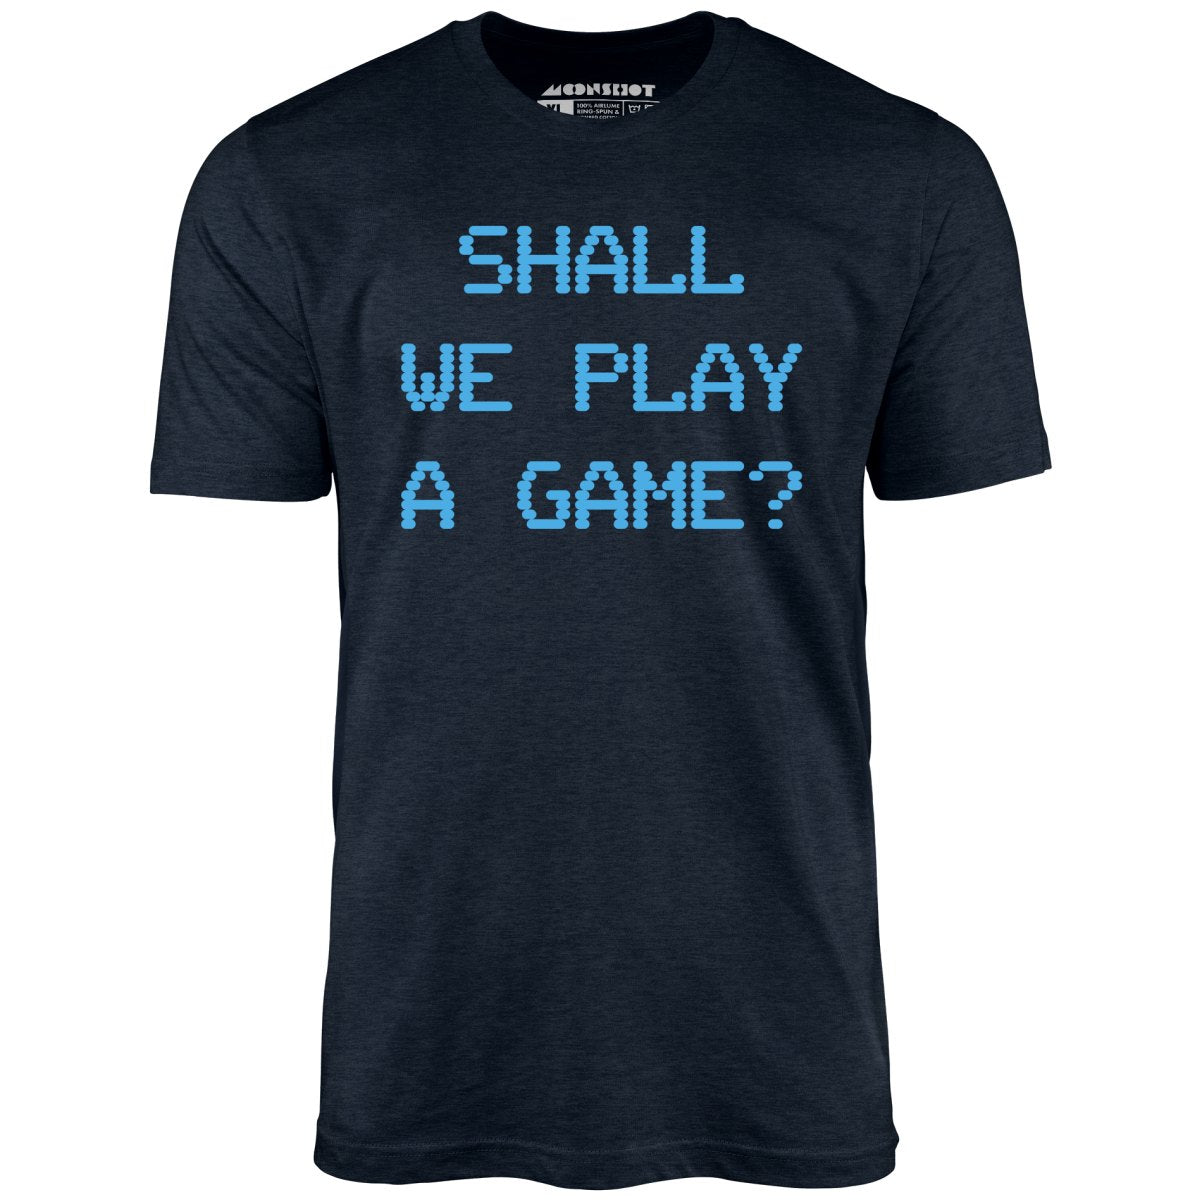 Shall We Play a Game? - Unisex T-Shirt